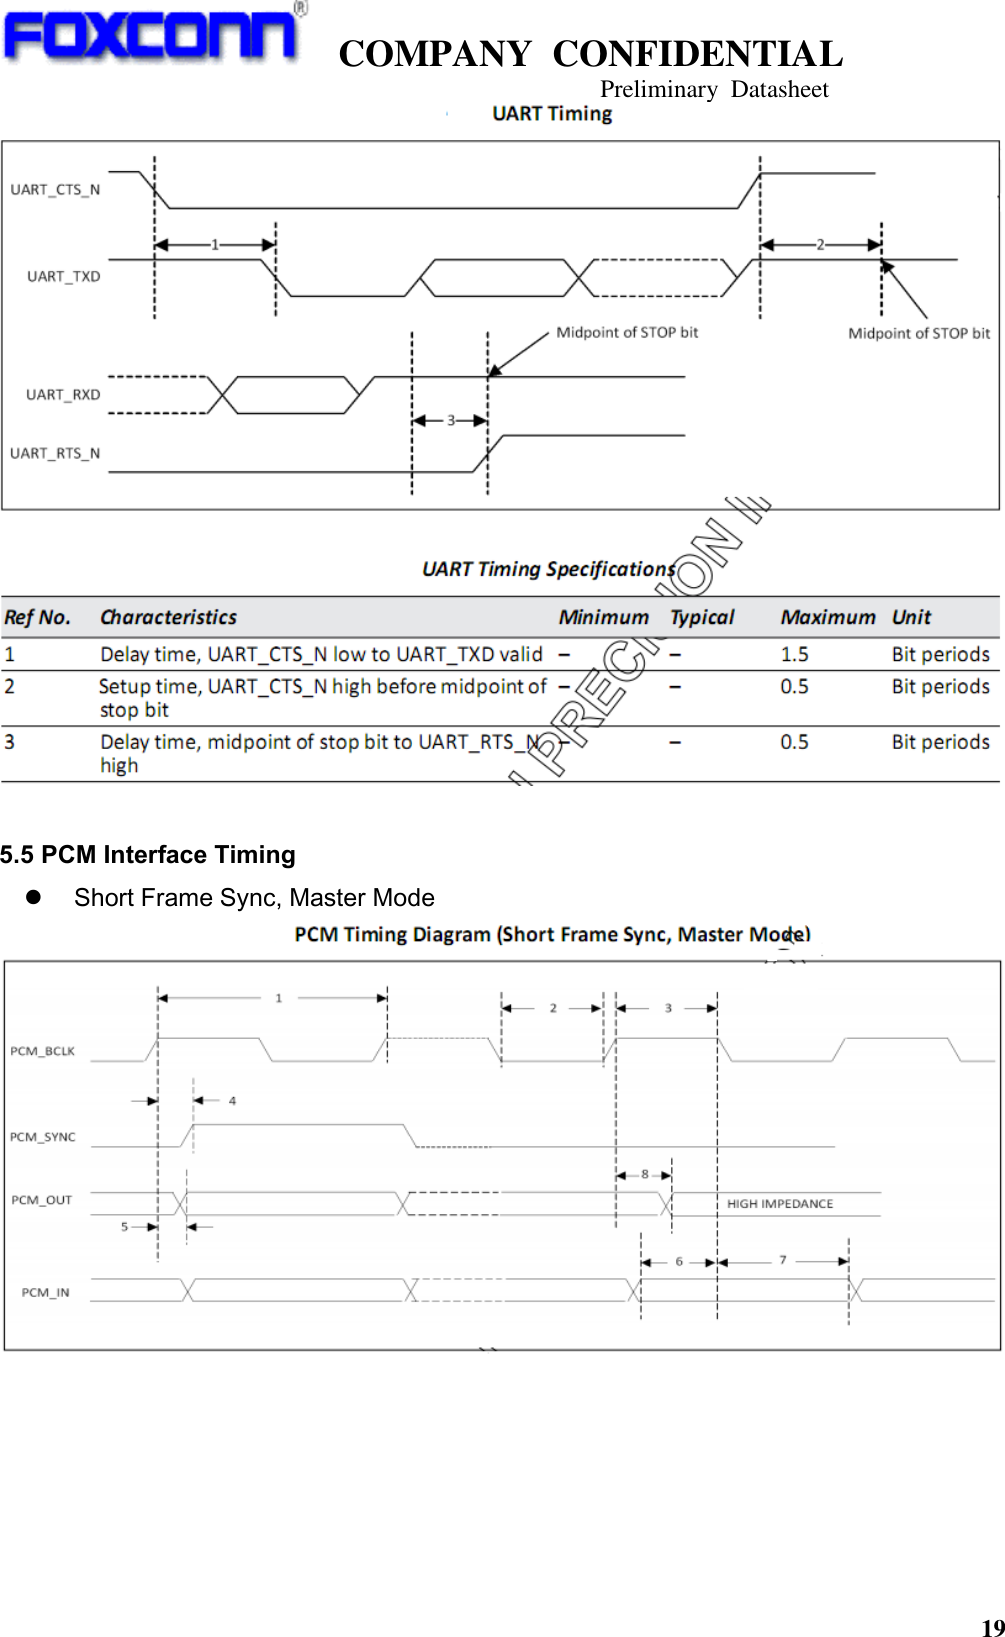   COMPANY  CONFIDENTIAL                                   Preliminary  Datasheet 19    5.5 PCM Interface Timing    Short Frame Sync, Master Mode  